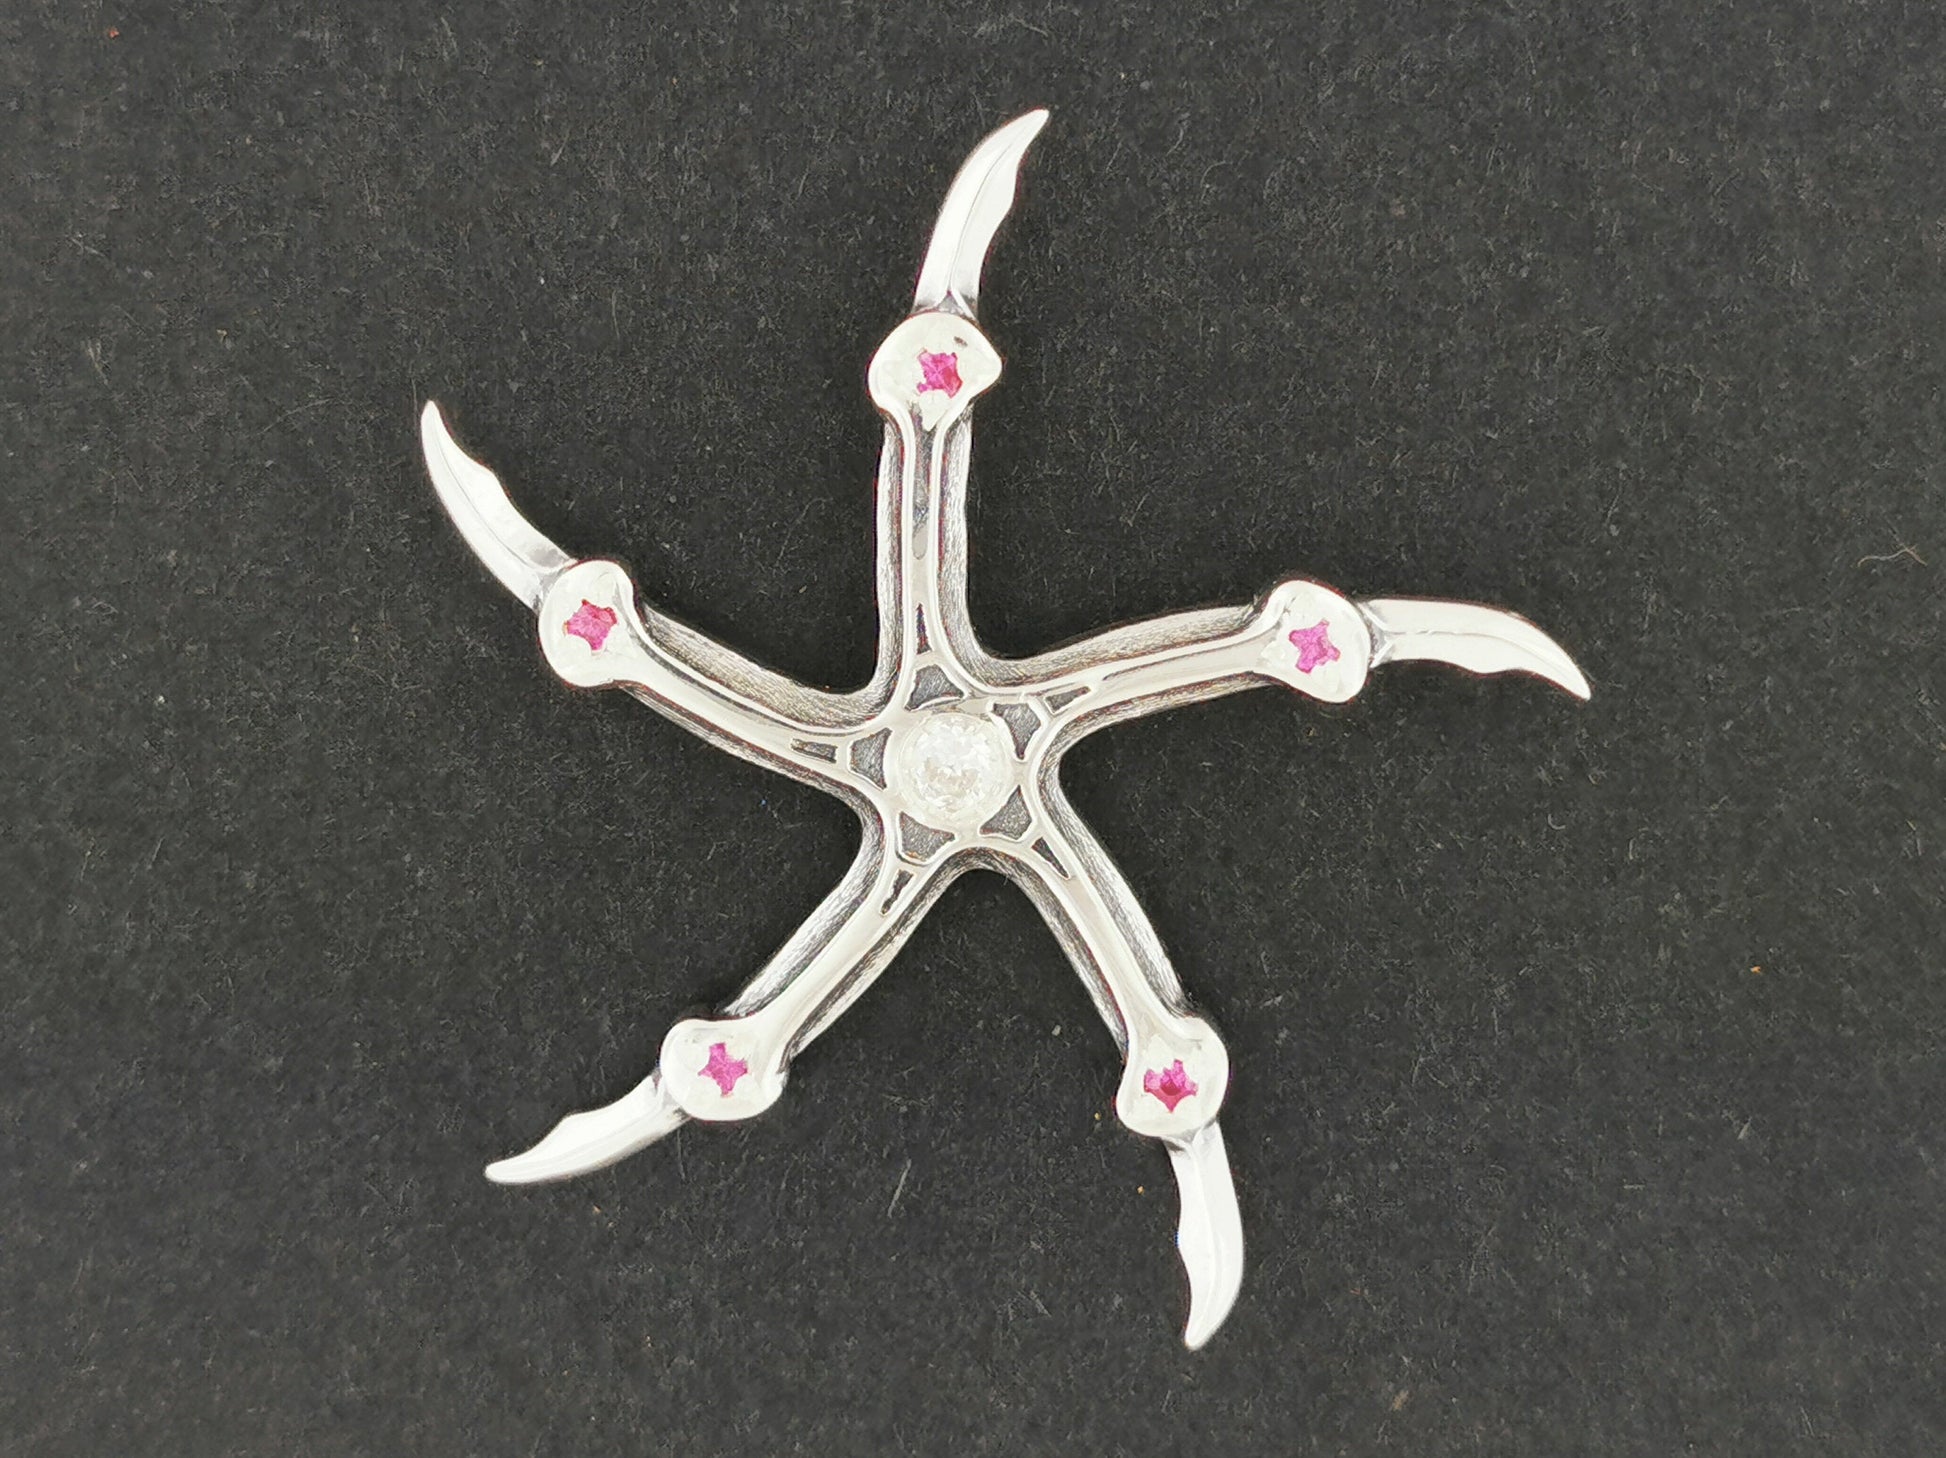 Krull Glaive Pendant in 925 Silver or Antique Bronze, Throwing Star Pendant Necklace, 80s Sci-Fi Pendant, Pop Culture Movie Pendant, Geeky Gift For Him, Silver Krull Pendant, Pop Culture Geek Pendant, Silver Movie Pendant, Silver Krull pendant